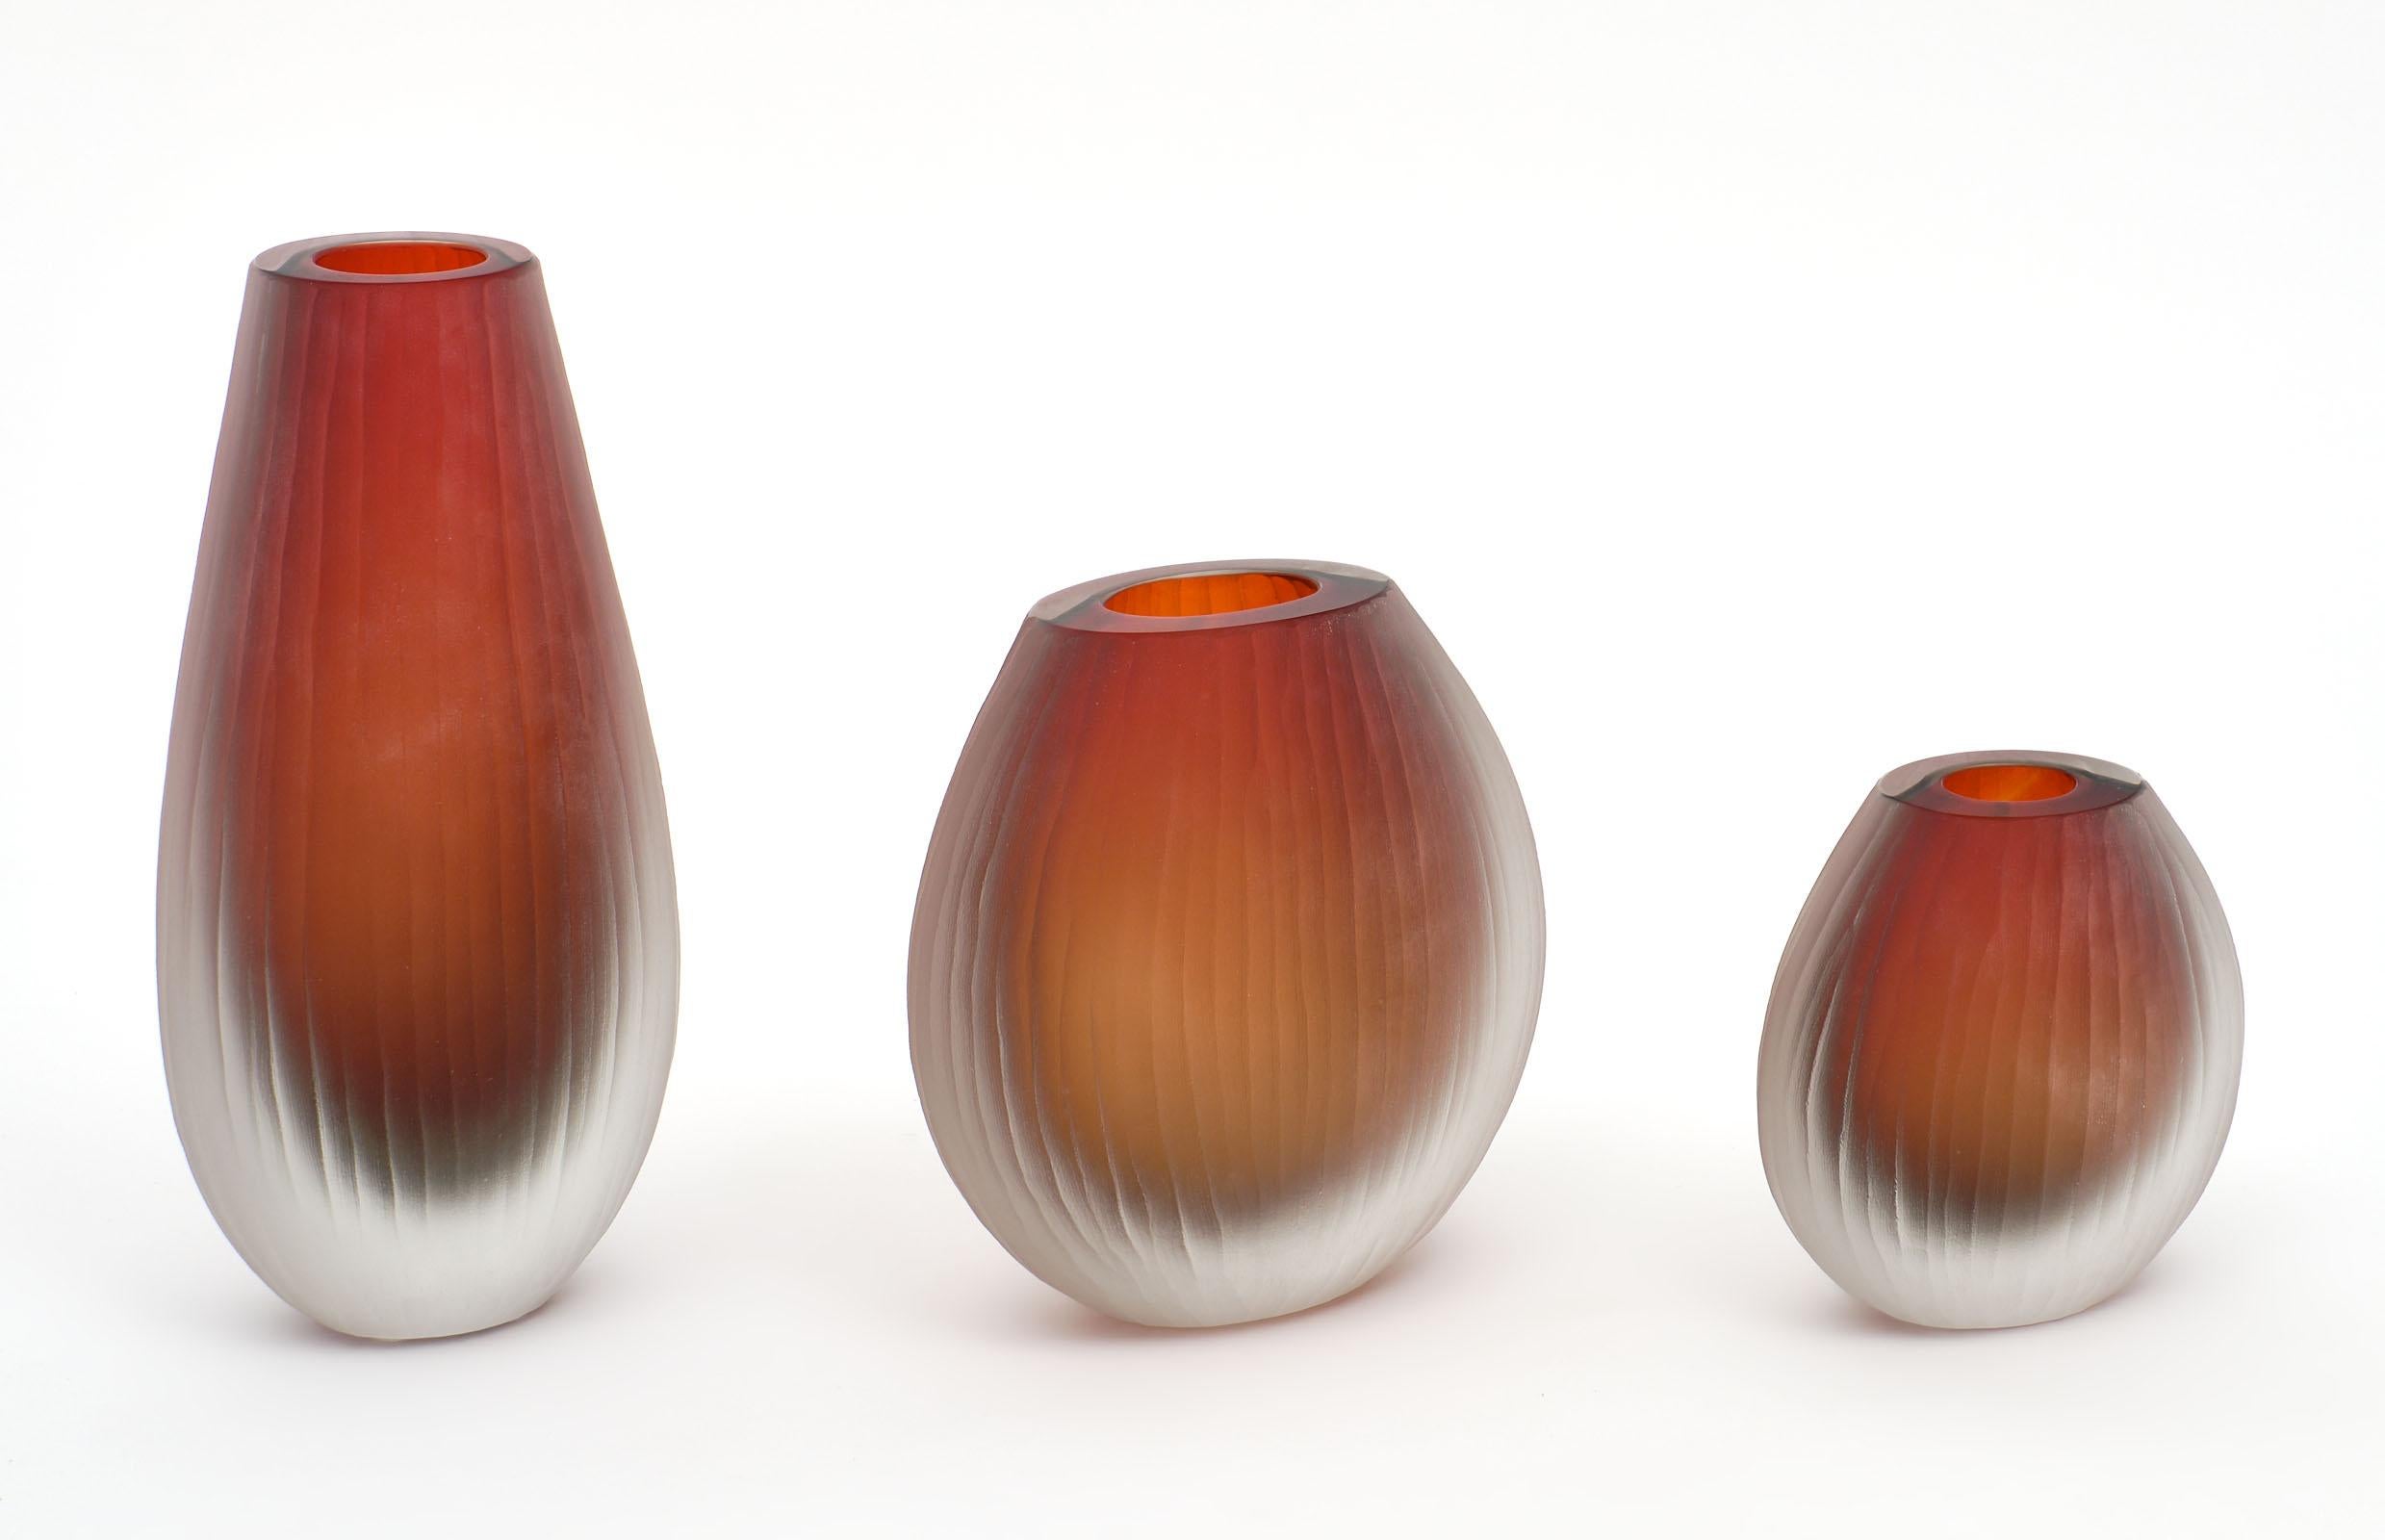 Three hand blown Murano glass vases of different sizes executed in the “battuto” or “hammered” fashion originated by Tobia Scarpa during his time at Venini. Each has a lightly textured and frosted finish with a beautiful ombré tone of red to orange.